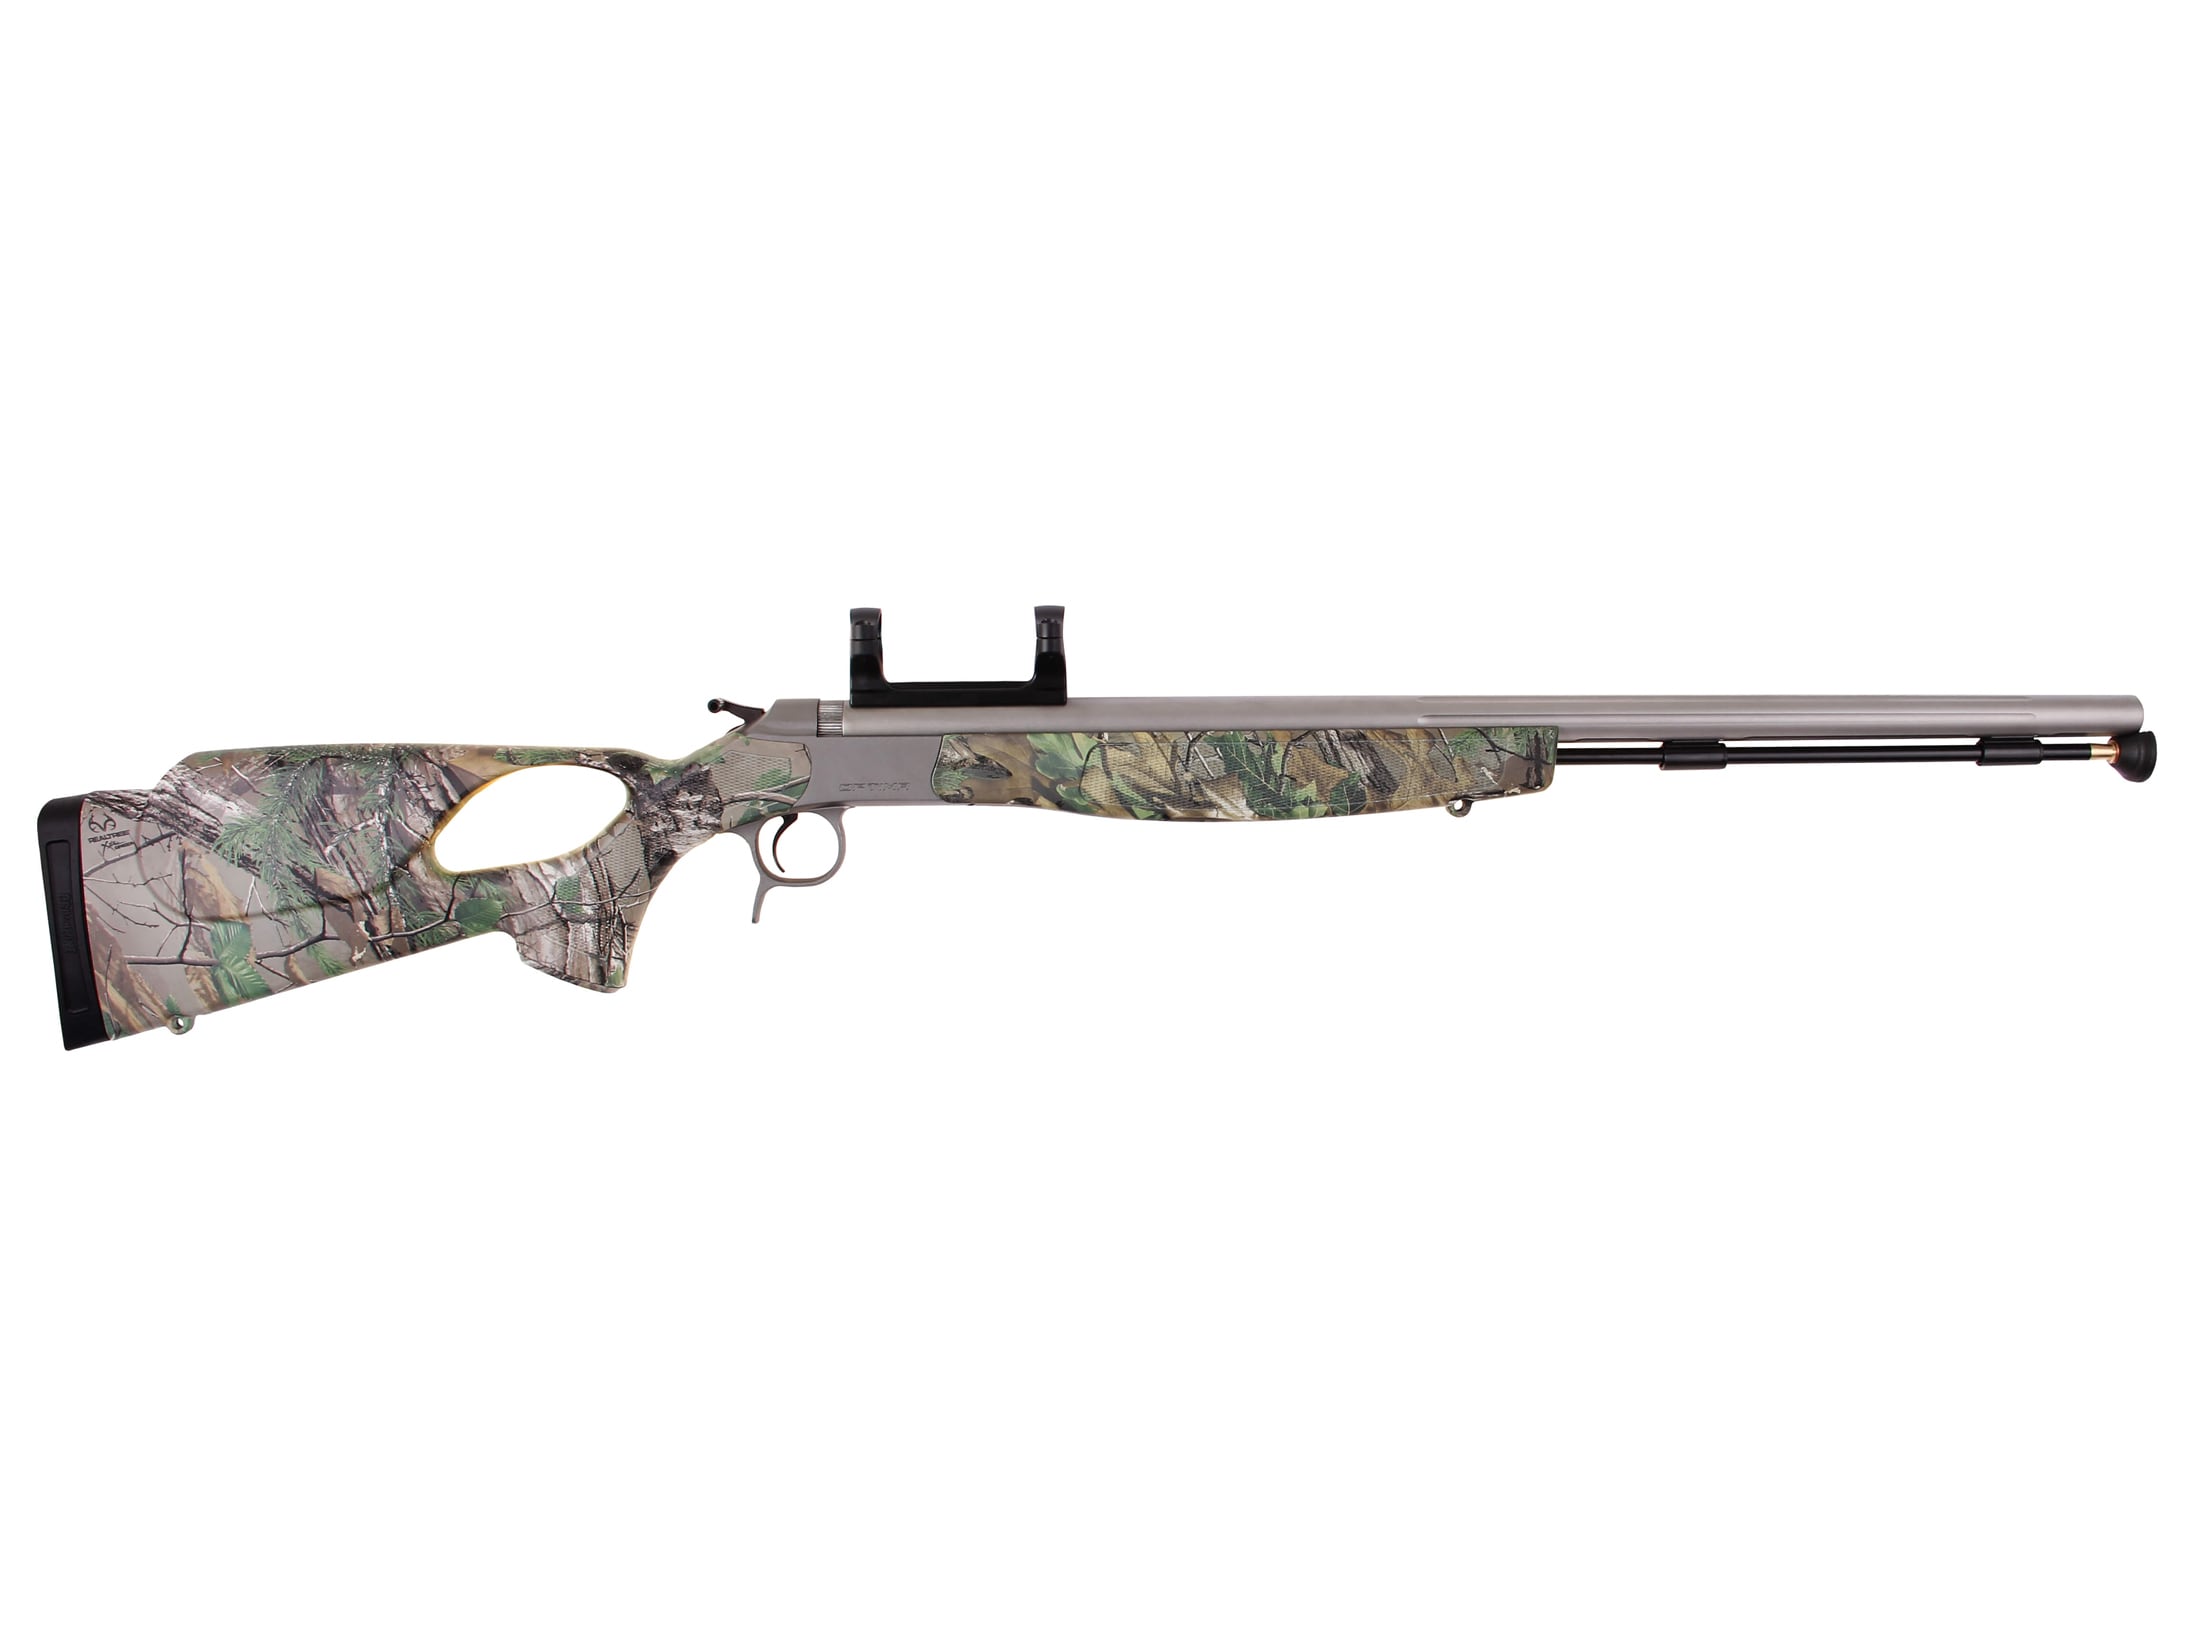 Image of CVA Optima V2/LR Muzzleloading Rifle with Dead-On Scope Mount 50 Caliber 28" Fluted Stainless Steel Barrel Synthetic Thumbhole Stock Realtree Xtra Green Camo